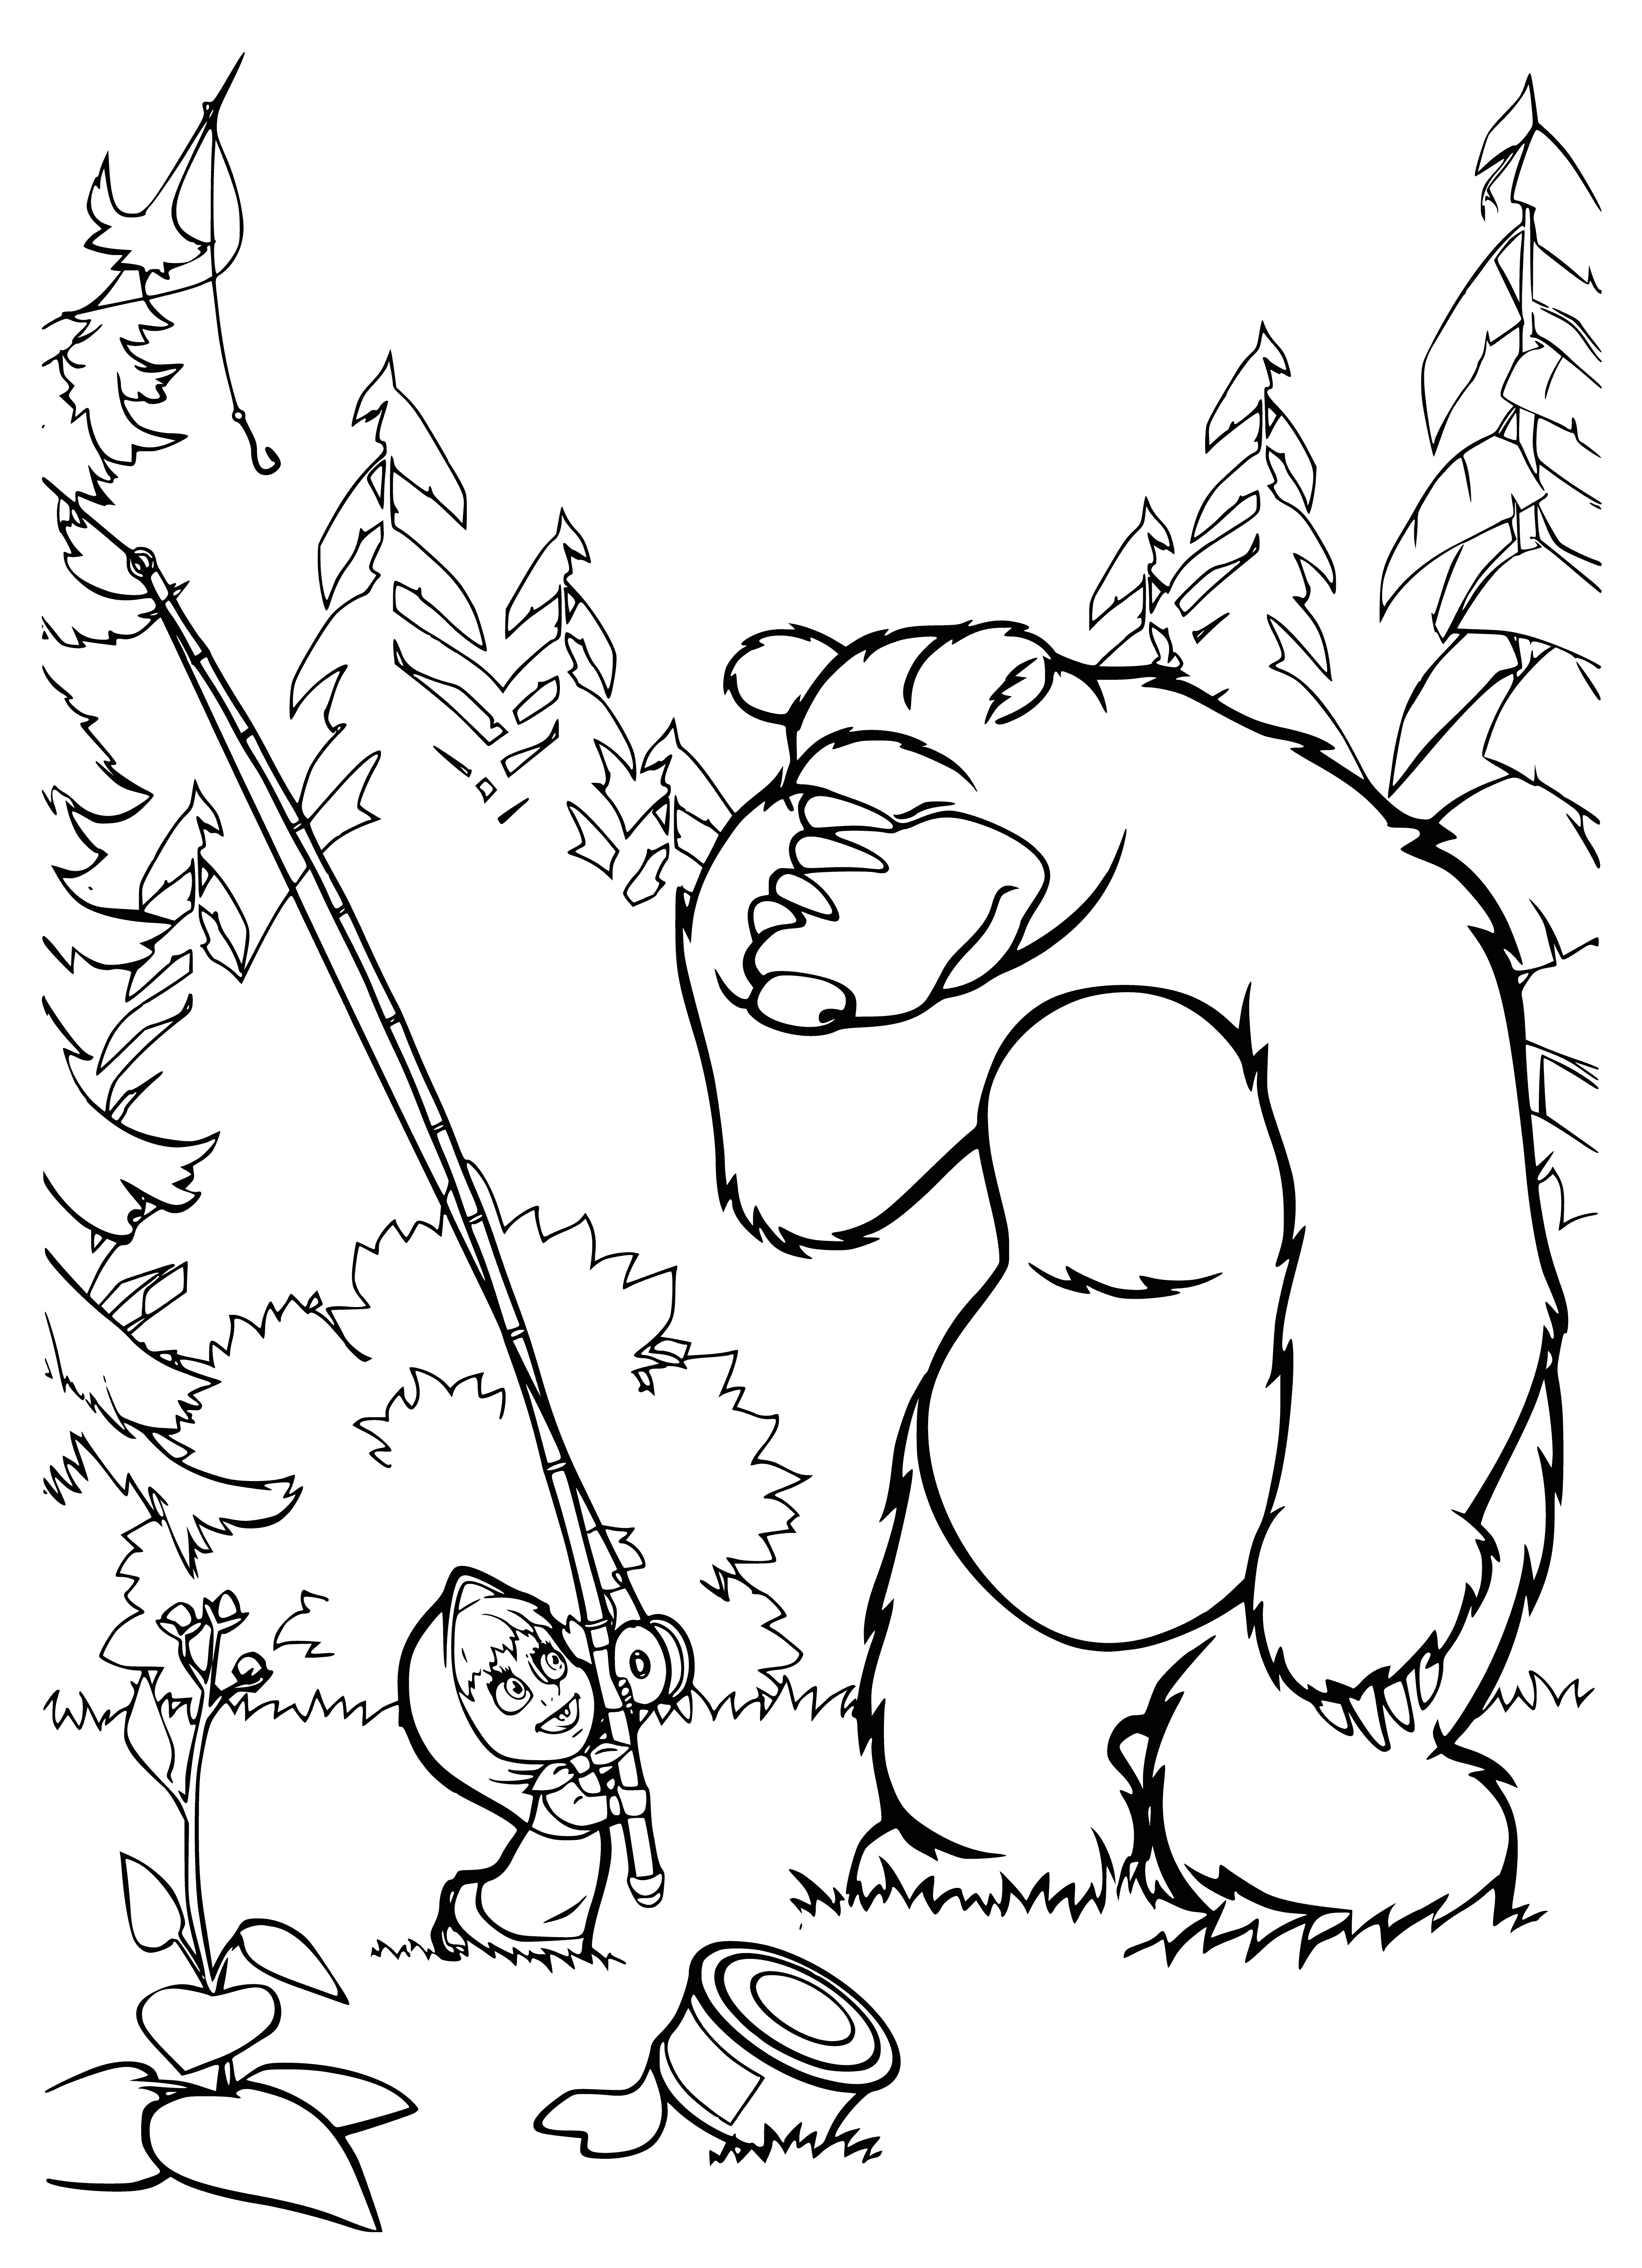 coloring page: Masha, a young girl in blue, is hitting a large bear in a meadow with a stick. The bear stands with outstretched arms.